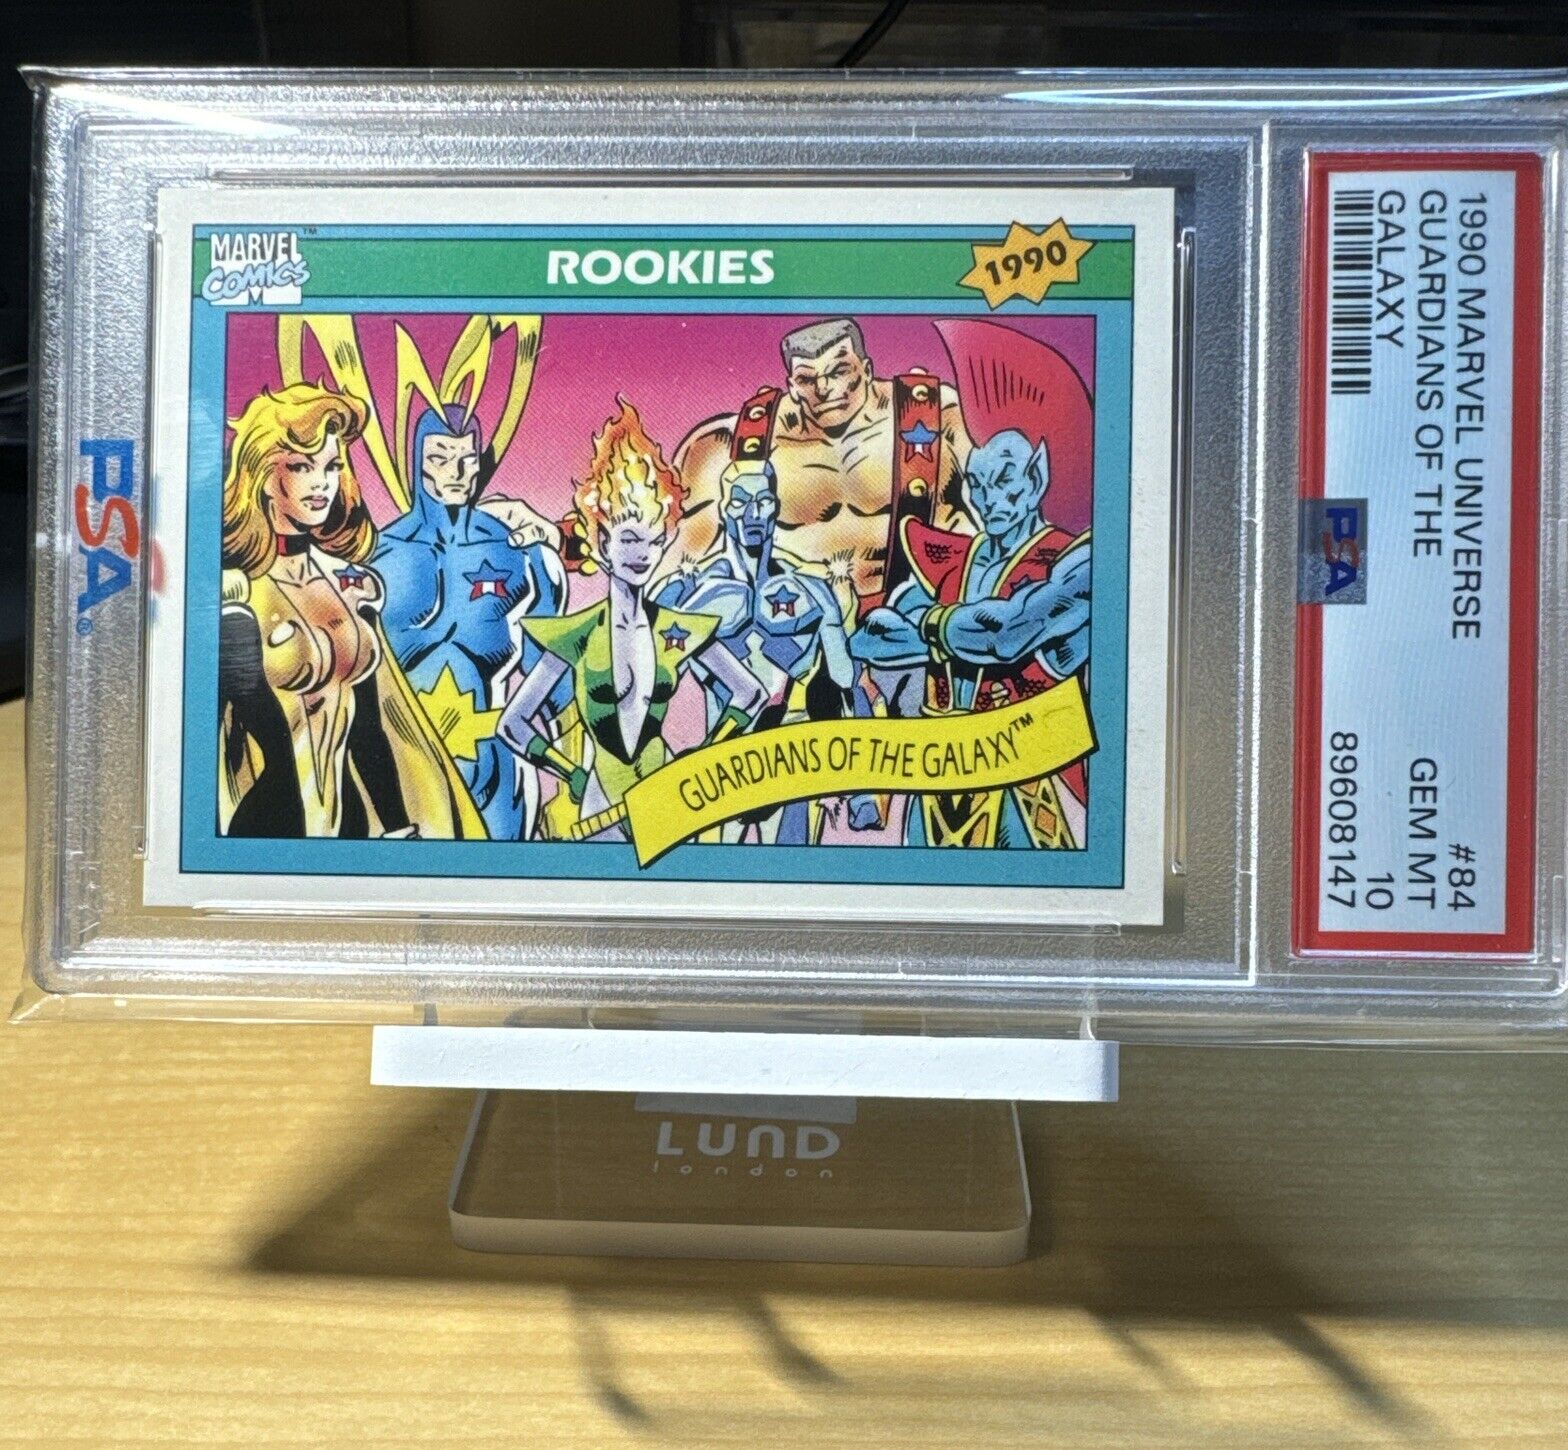 1990 MARVEL UNIVERSE #84 GUARDIANS OF THE GALAXY PSA 10 N3939396-027